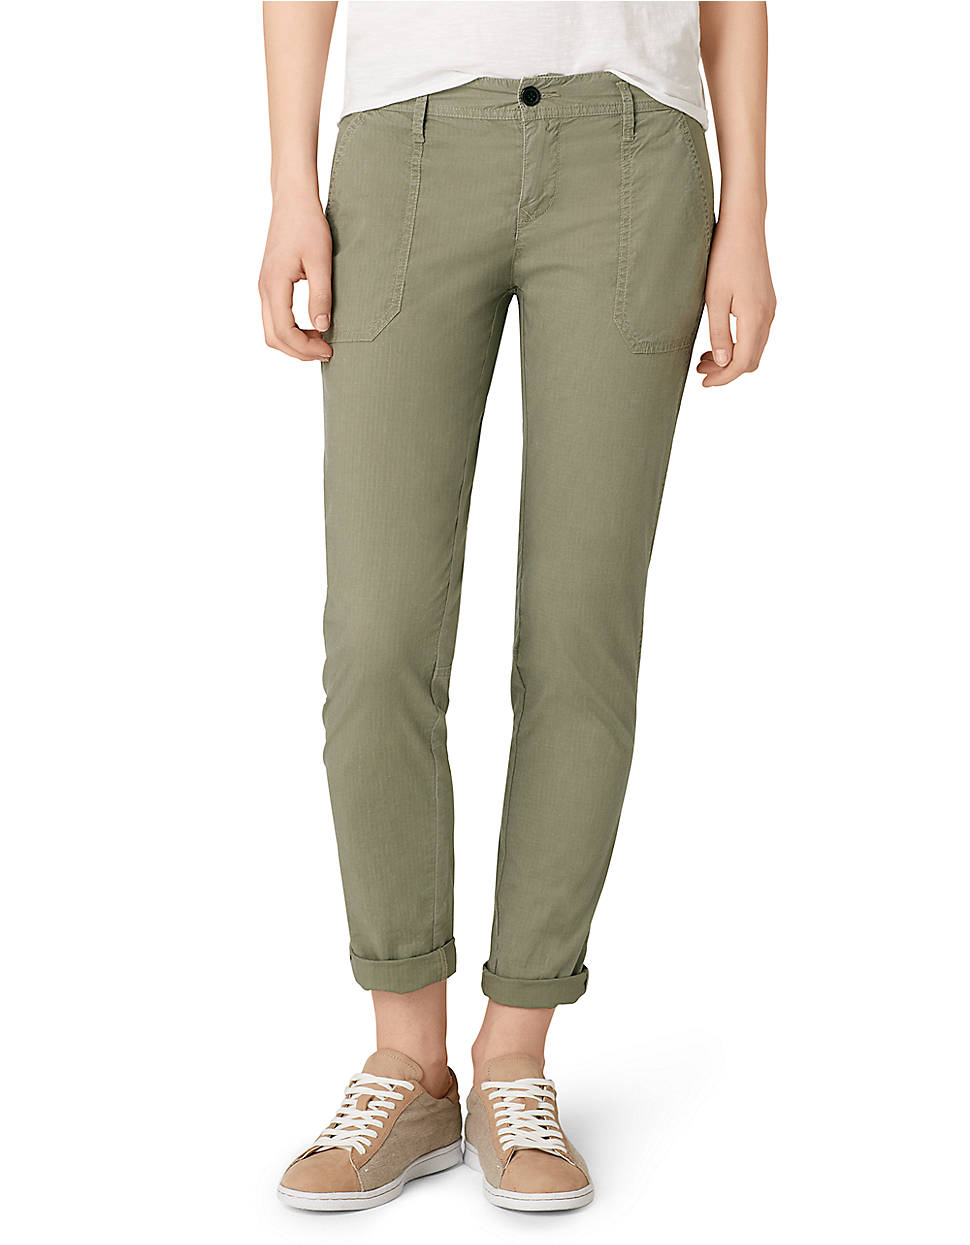 Lyst - Calvin Klein Jeans Boy Ankle Roll Chino in Green